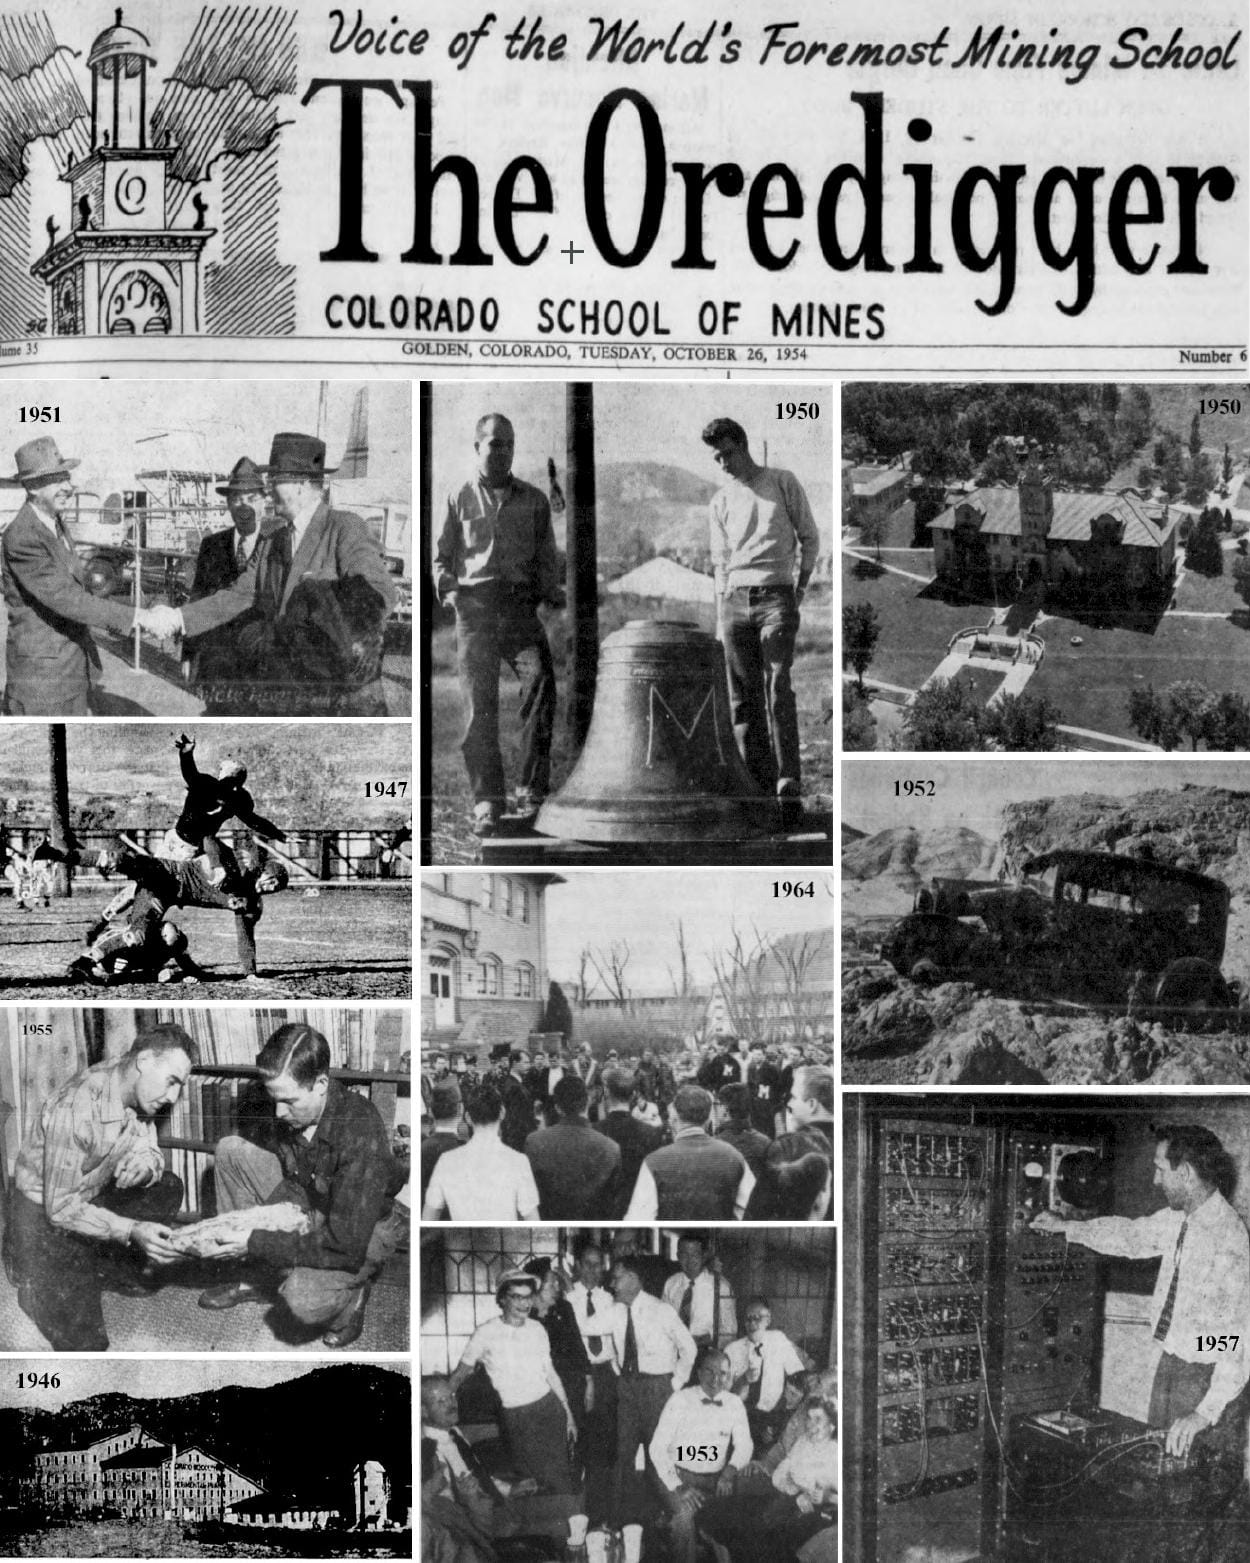 masthead from October 26, 1934 Oredigger plus student photos from the 1940s-1960s